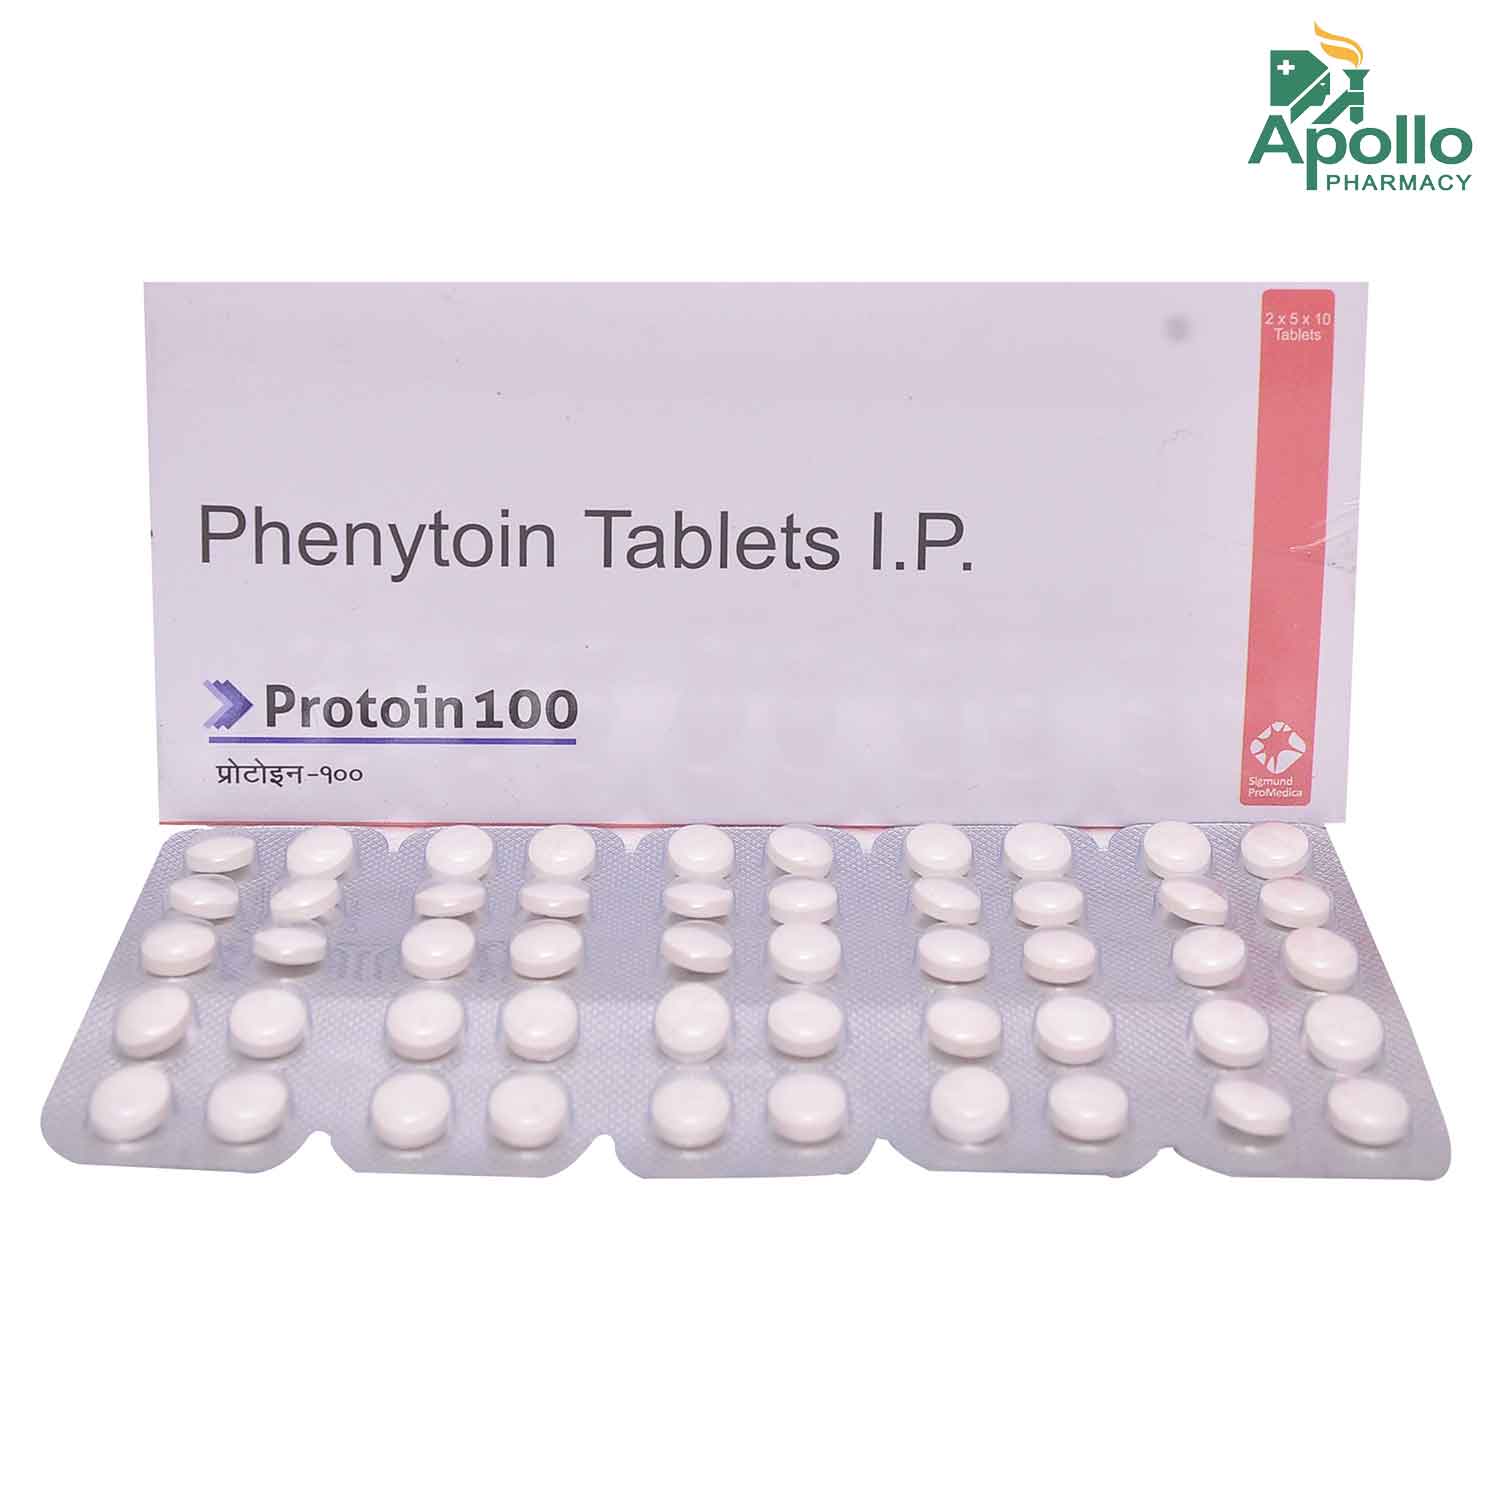 Protoin 100 Tablet 10's, Pack of 10 TABLETS